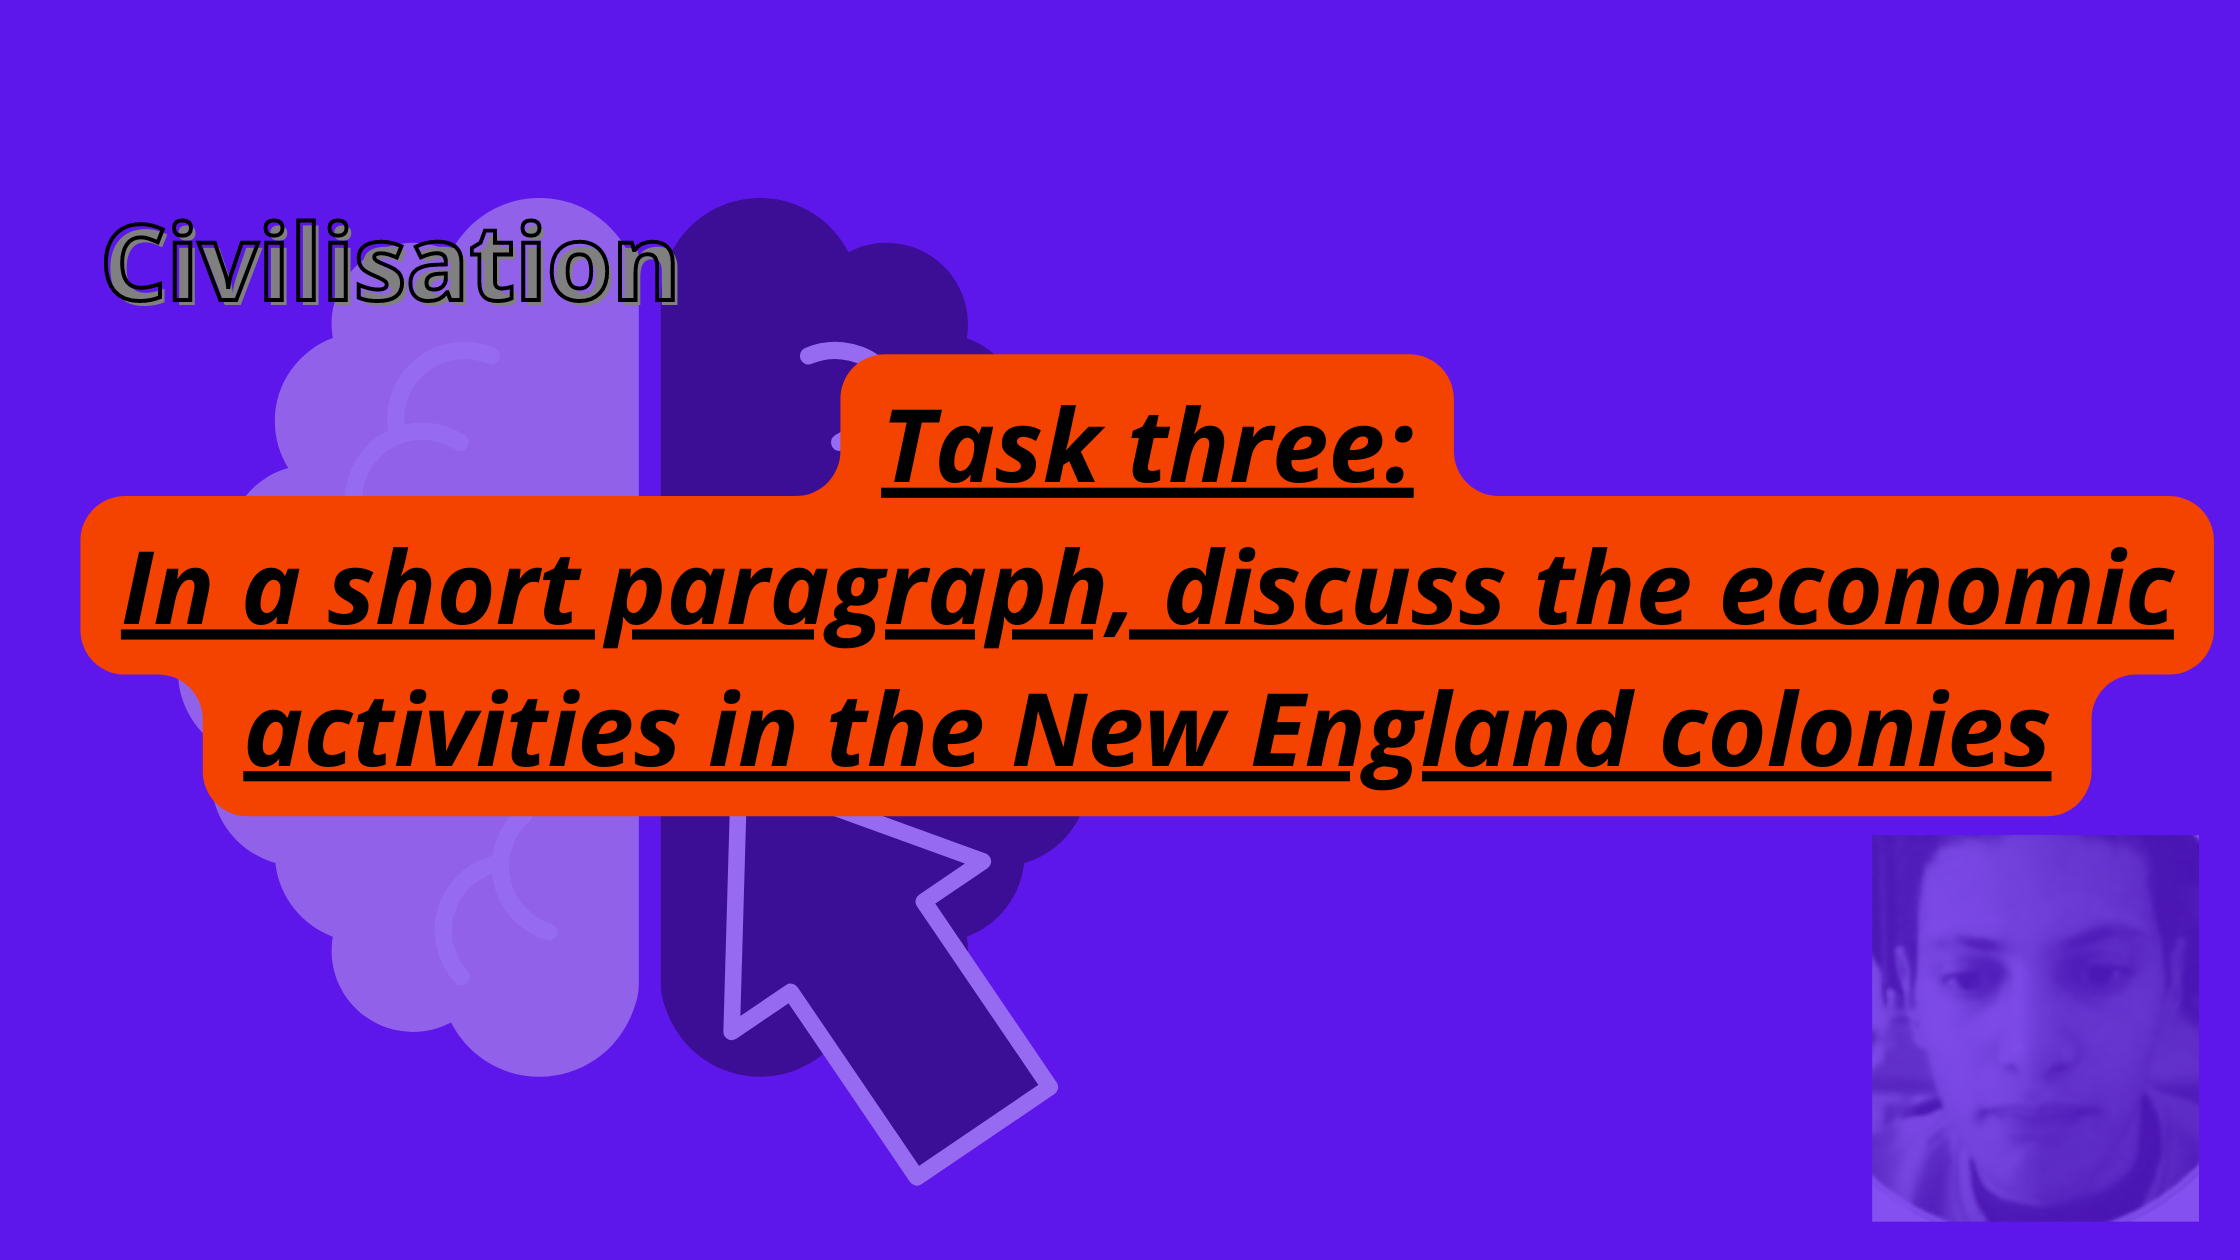 In a short paragraph, discuss the economic activities in the New England colonies